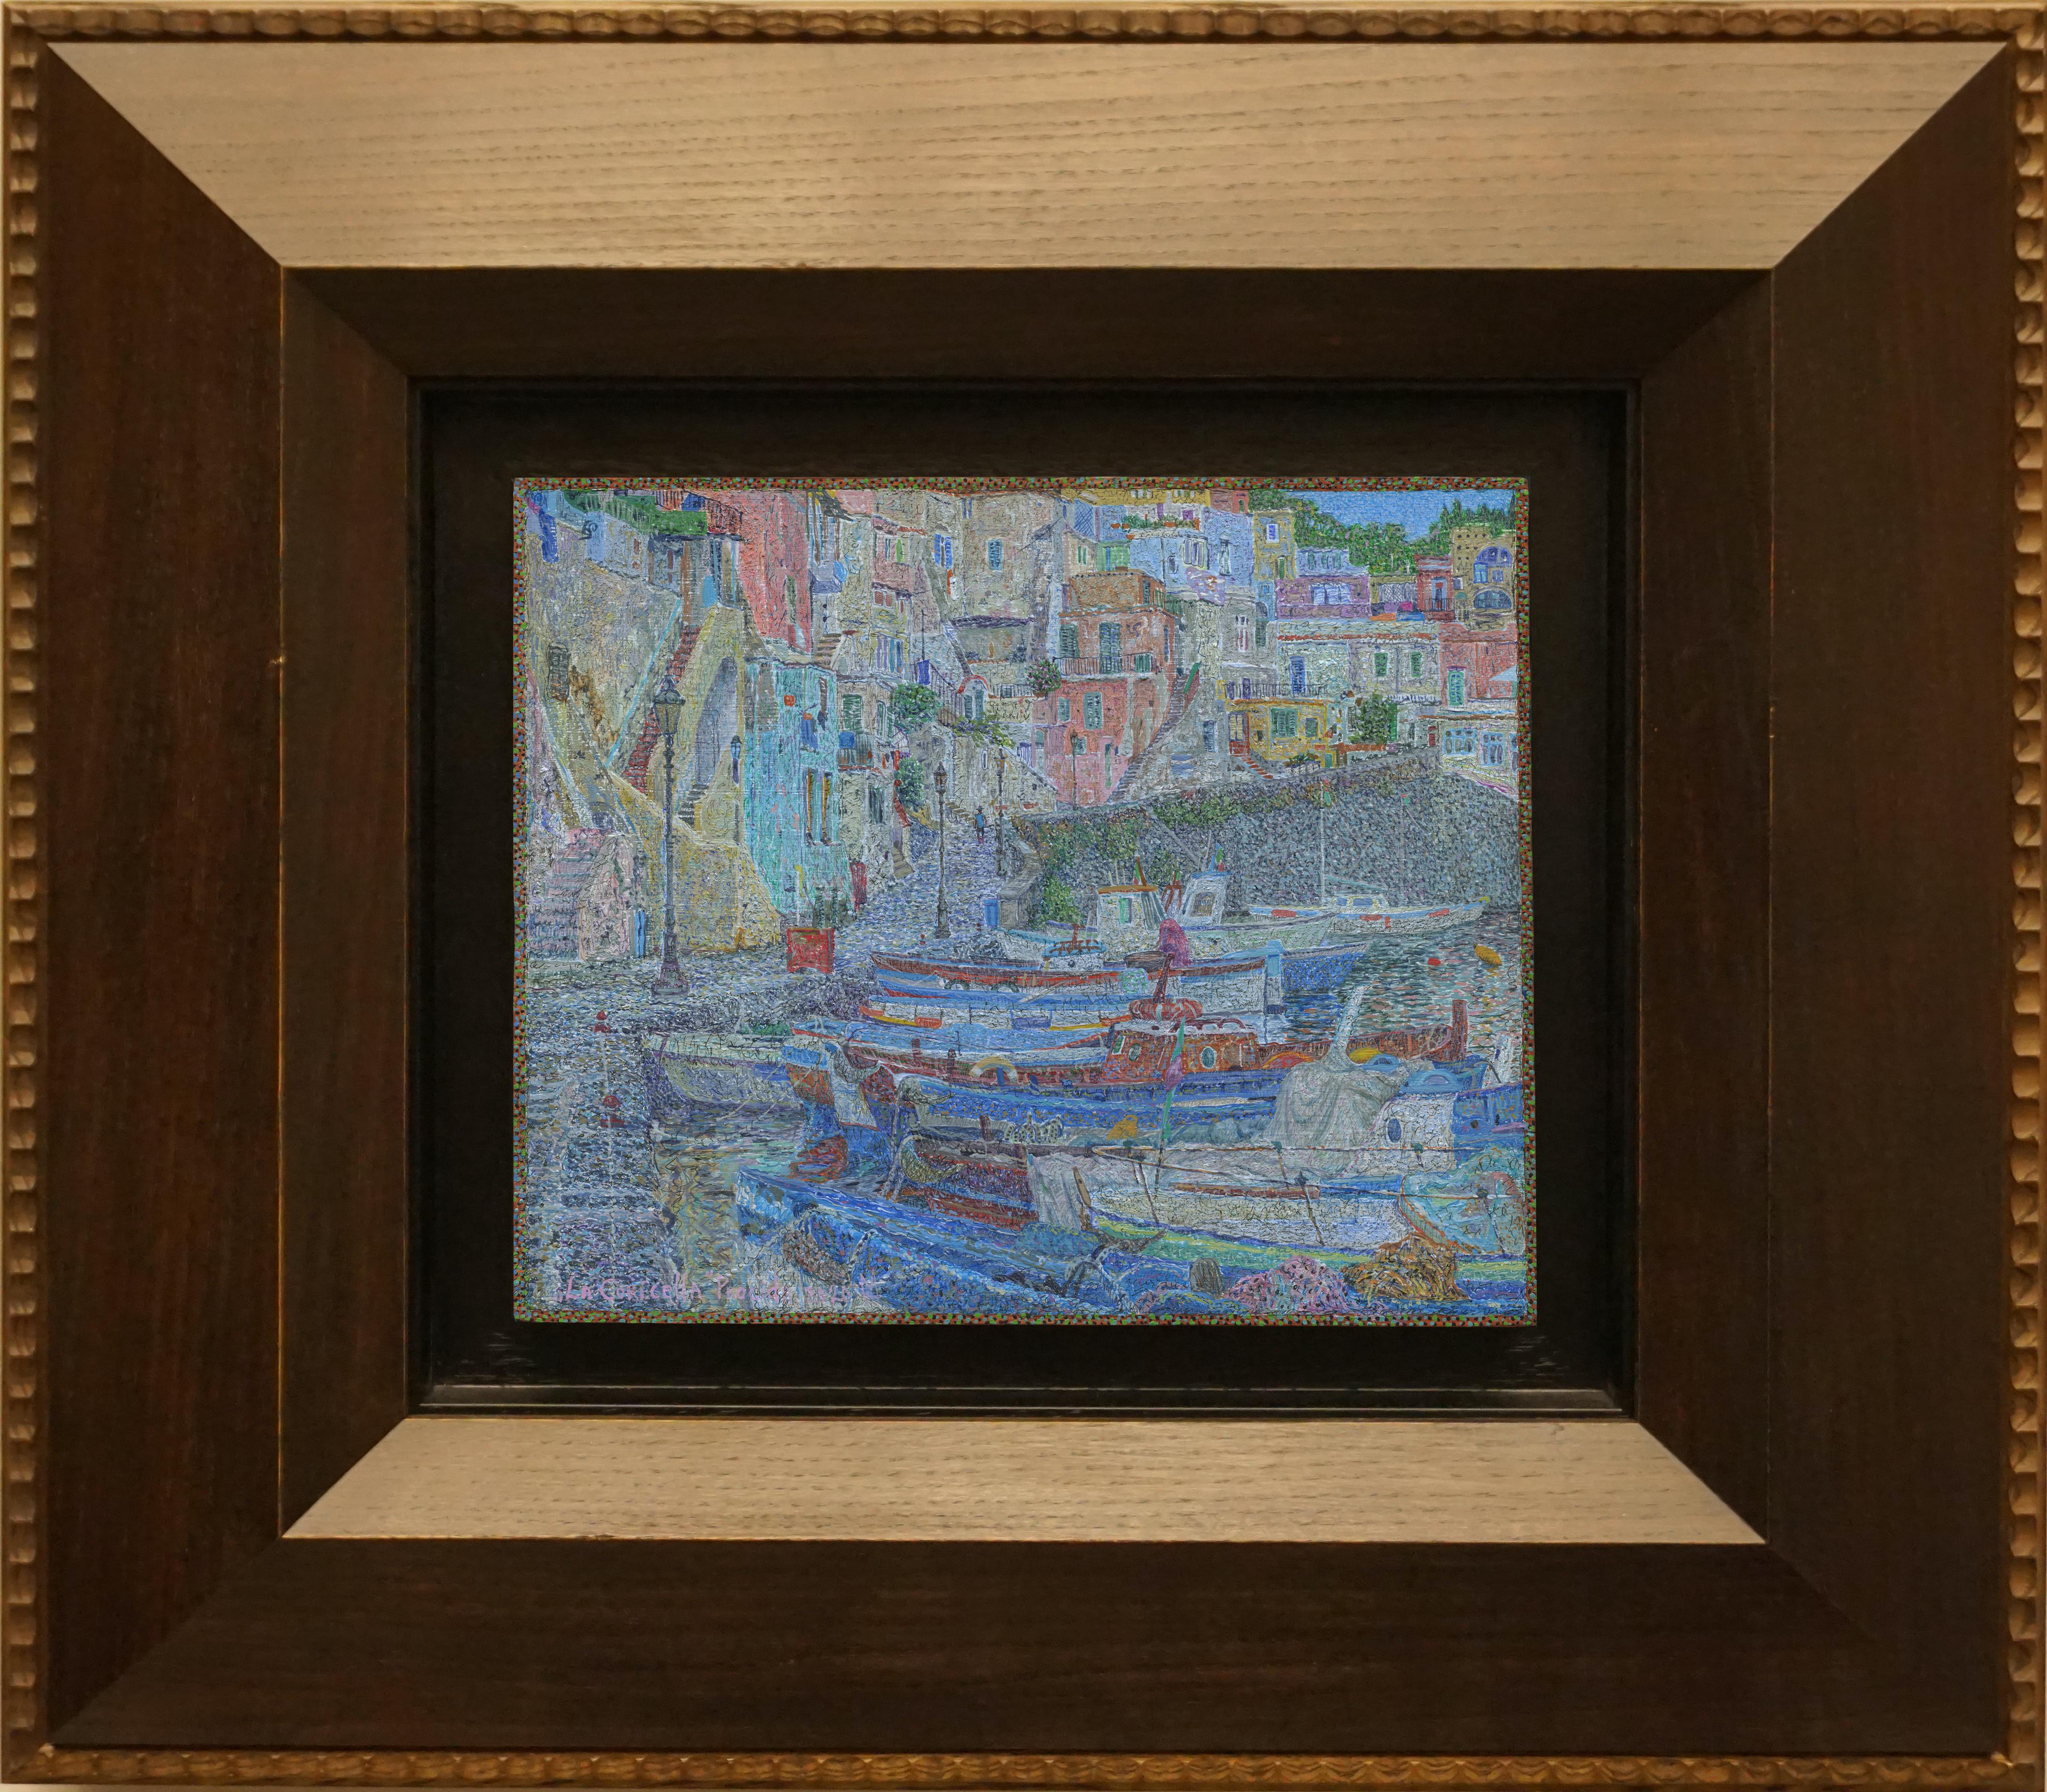 "Corichella. Procida" Framed 20" x 24" inch Painting by Nikita Makarov

Woodpanel, levkas, tempera, acrylic
2020
Comes in a custom frame as shown on photos. 
Frames are designed by the Artist for each work. 
Size: 10" x 12" inch
Size framed: 20" x